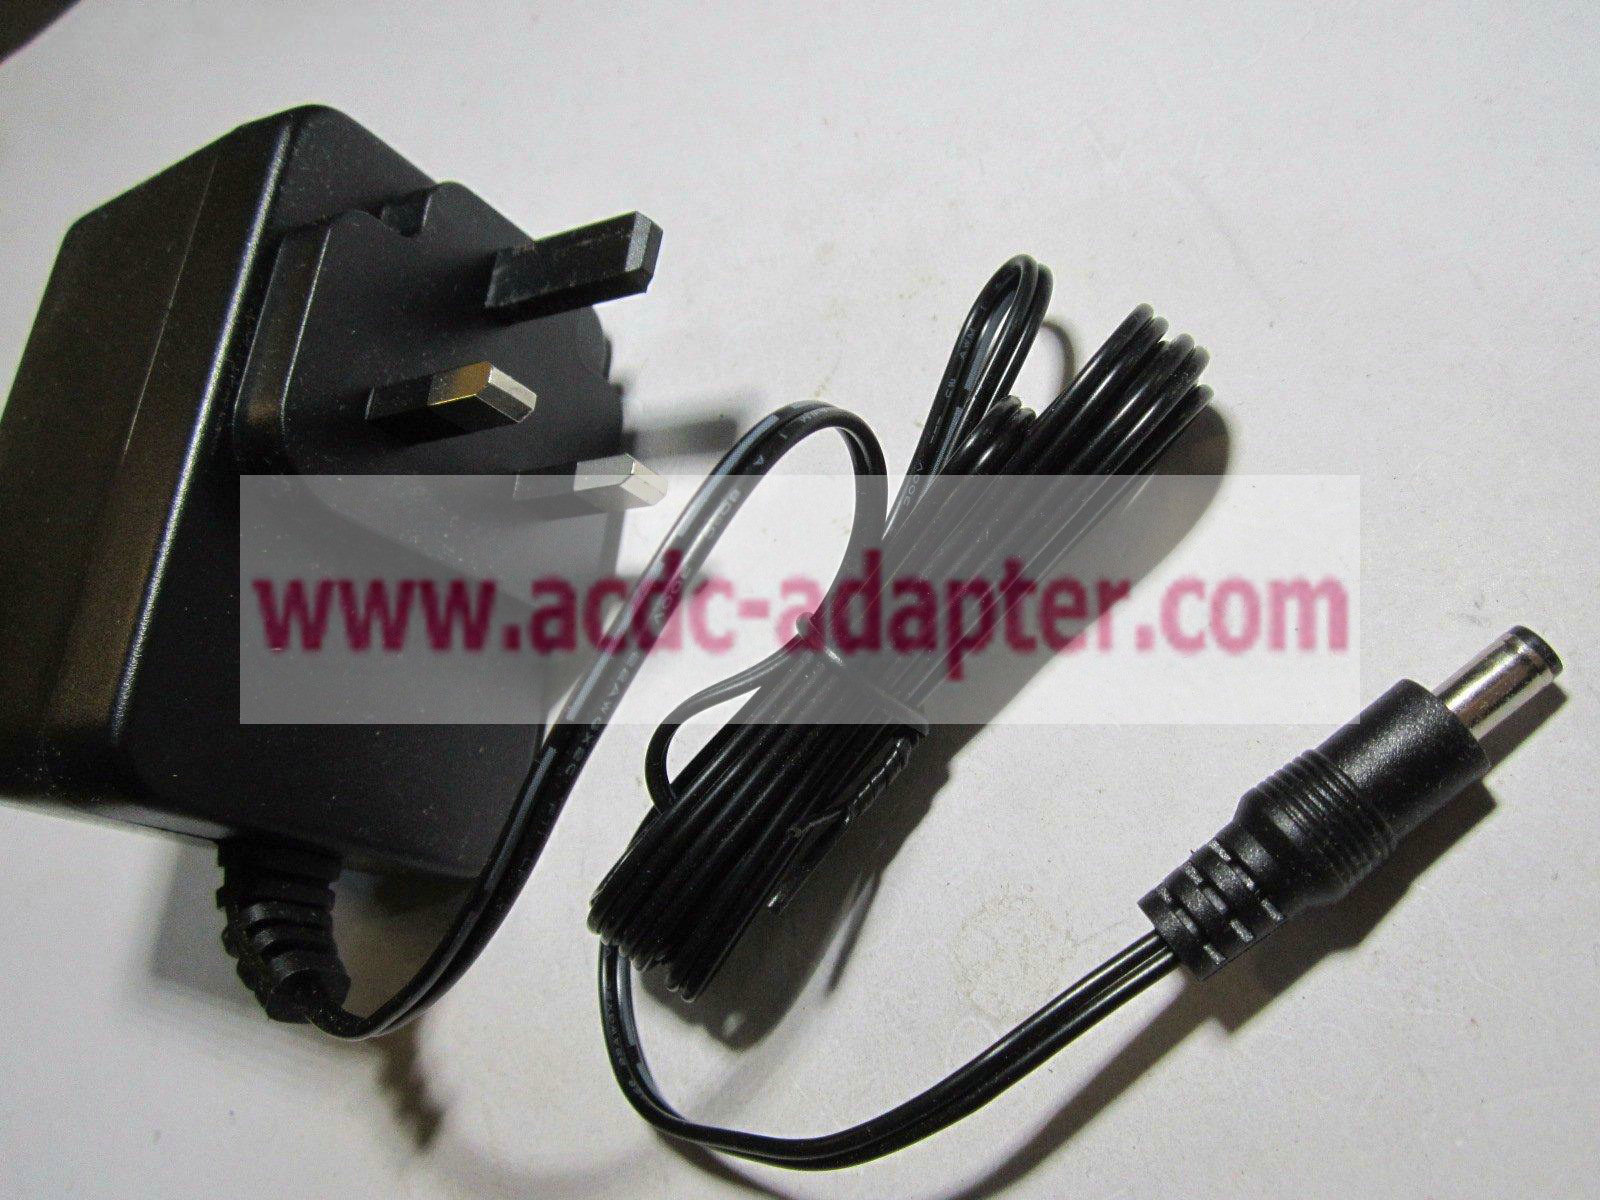 New replacement for 11.5V 1.6A AC-AC Adaptor Power Supply for Creative SBS 2.1 370 - Click Image to Close